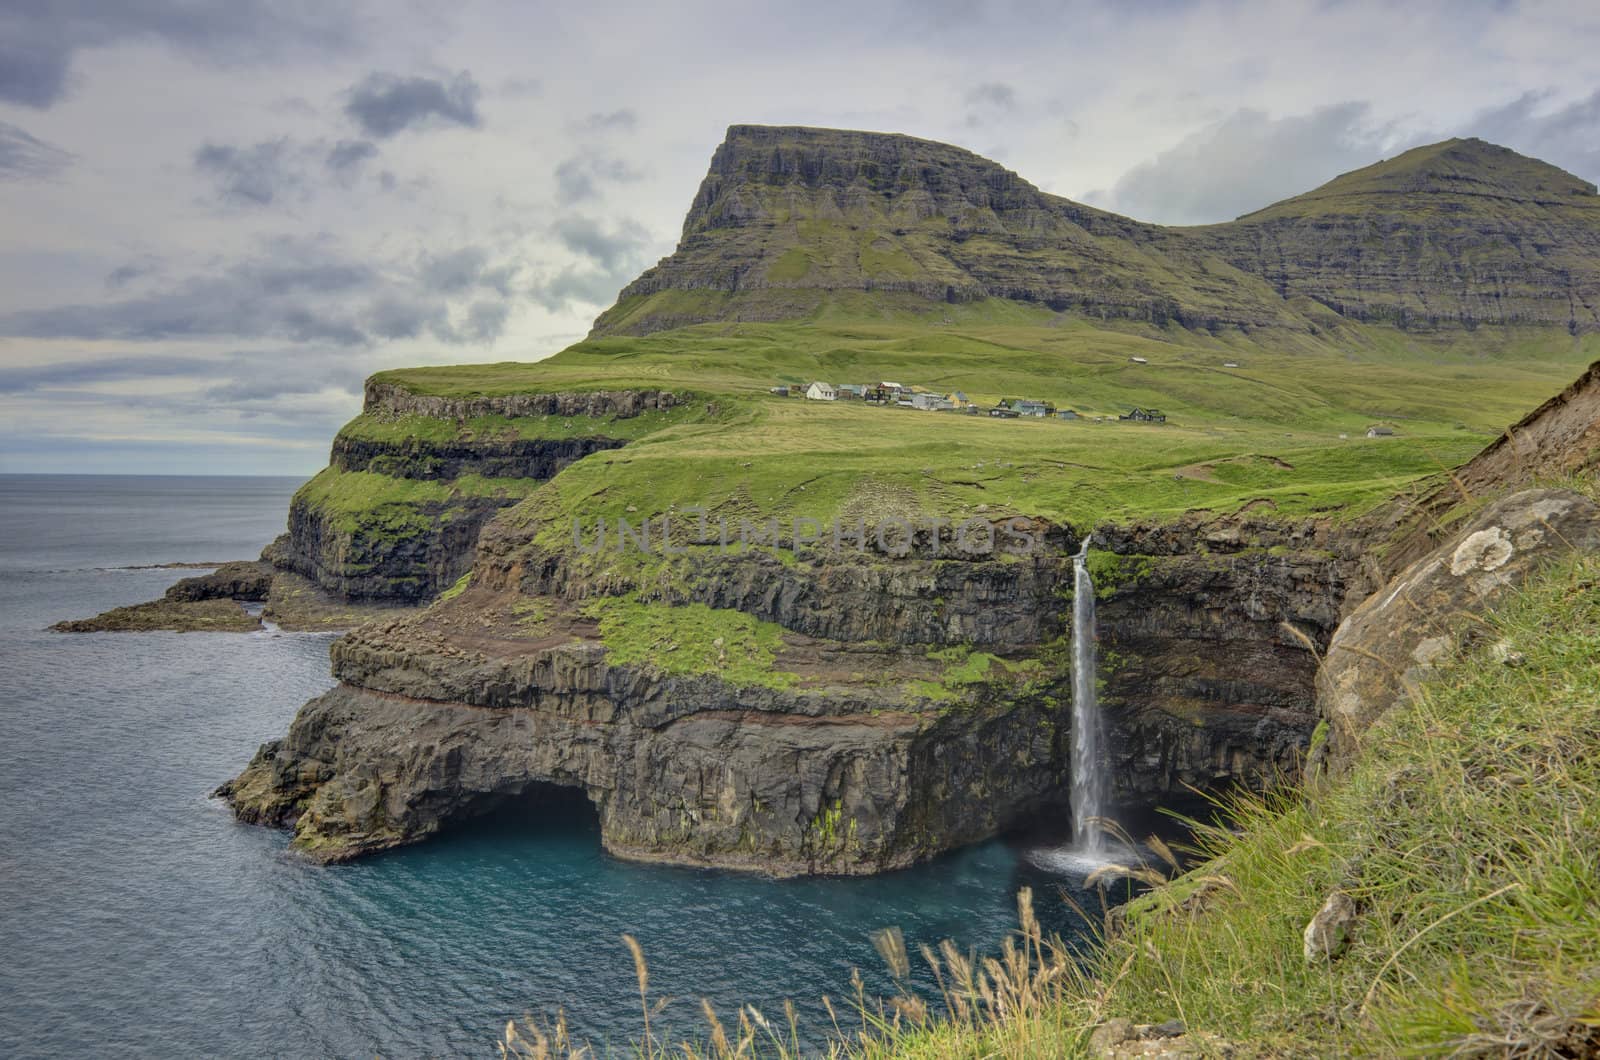 The village 'Gásadalur' is surrounded by high mountains and the clear blue Atlantic on the island 'Vagar'.